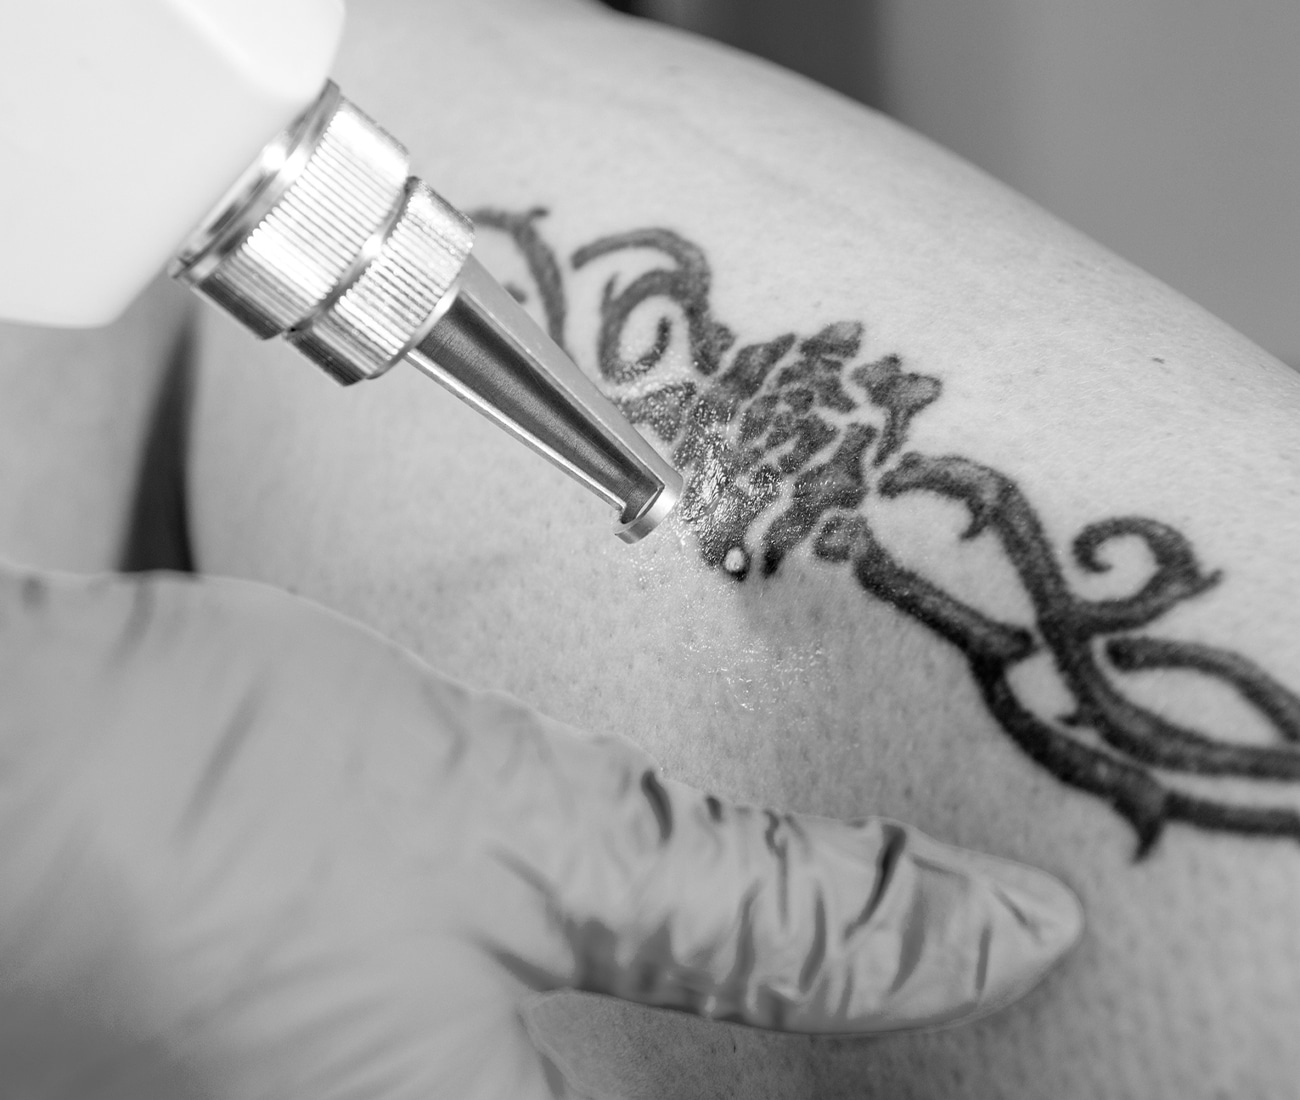 A Close Up Of Someone Having A Tattoo Removed On Some Part Of Their Body, Black And White Photo